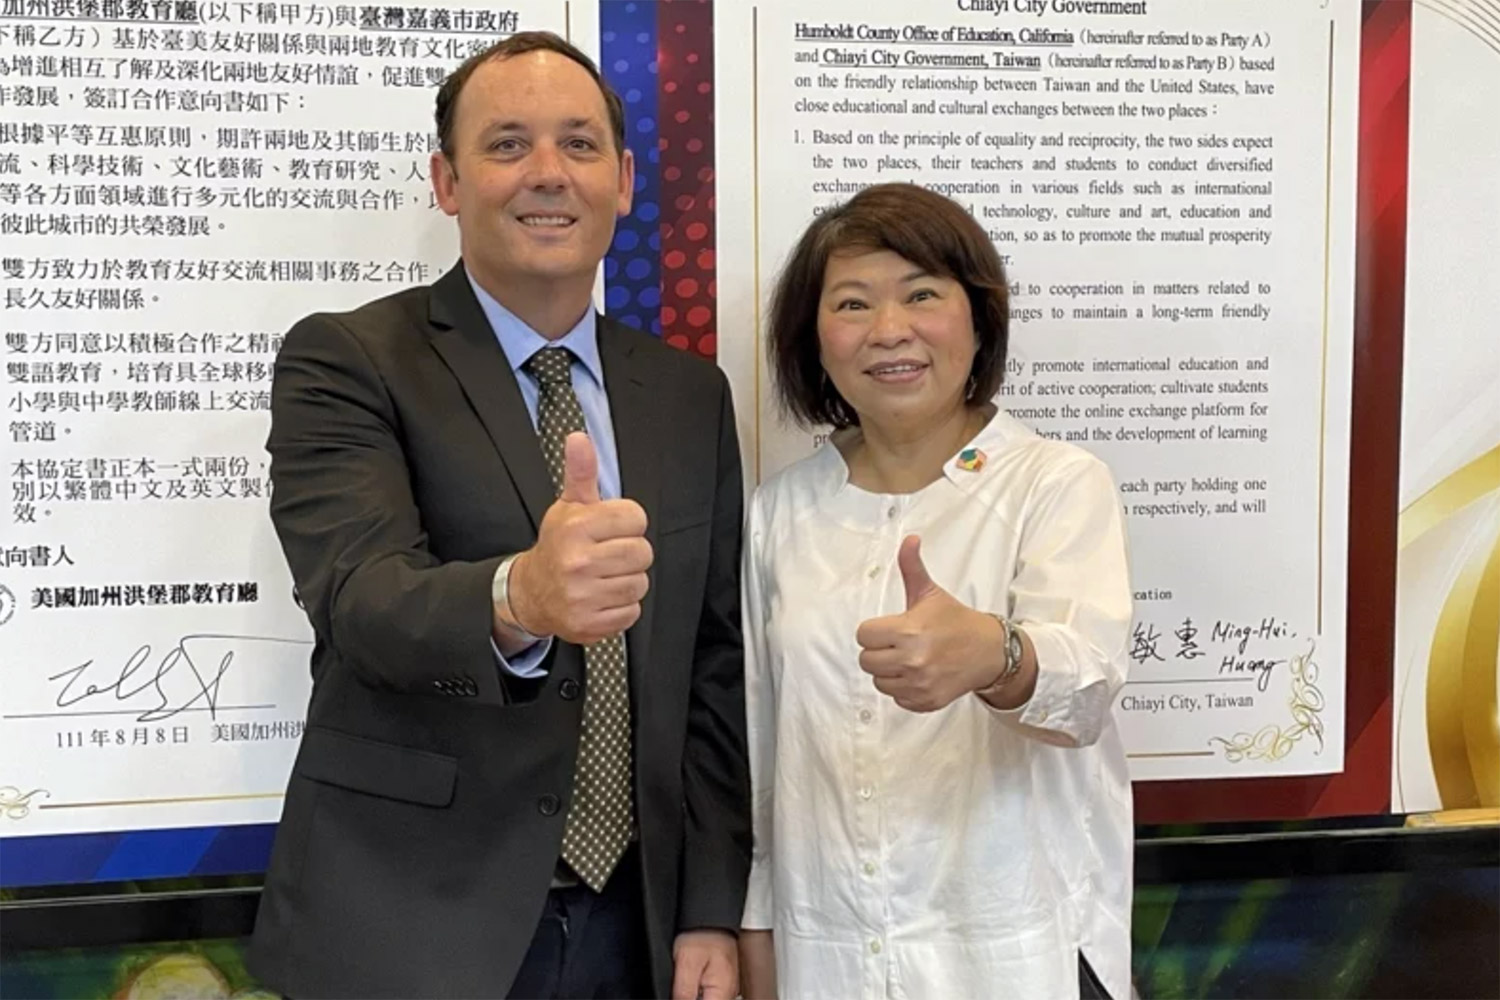 HCOE Assistant Superintendent Colby Smart with a Taiwanese educator